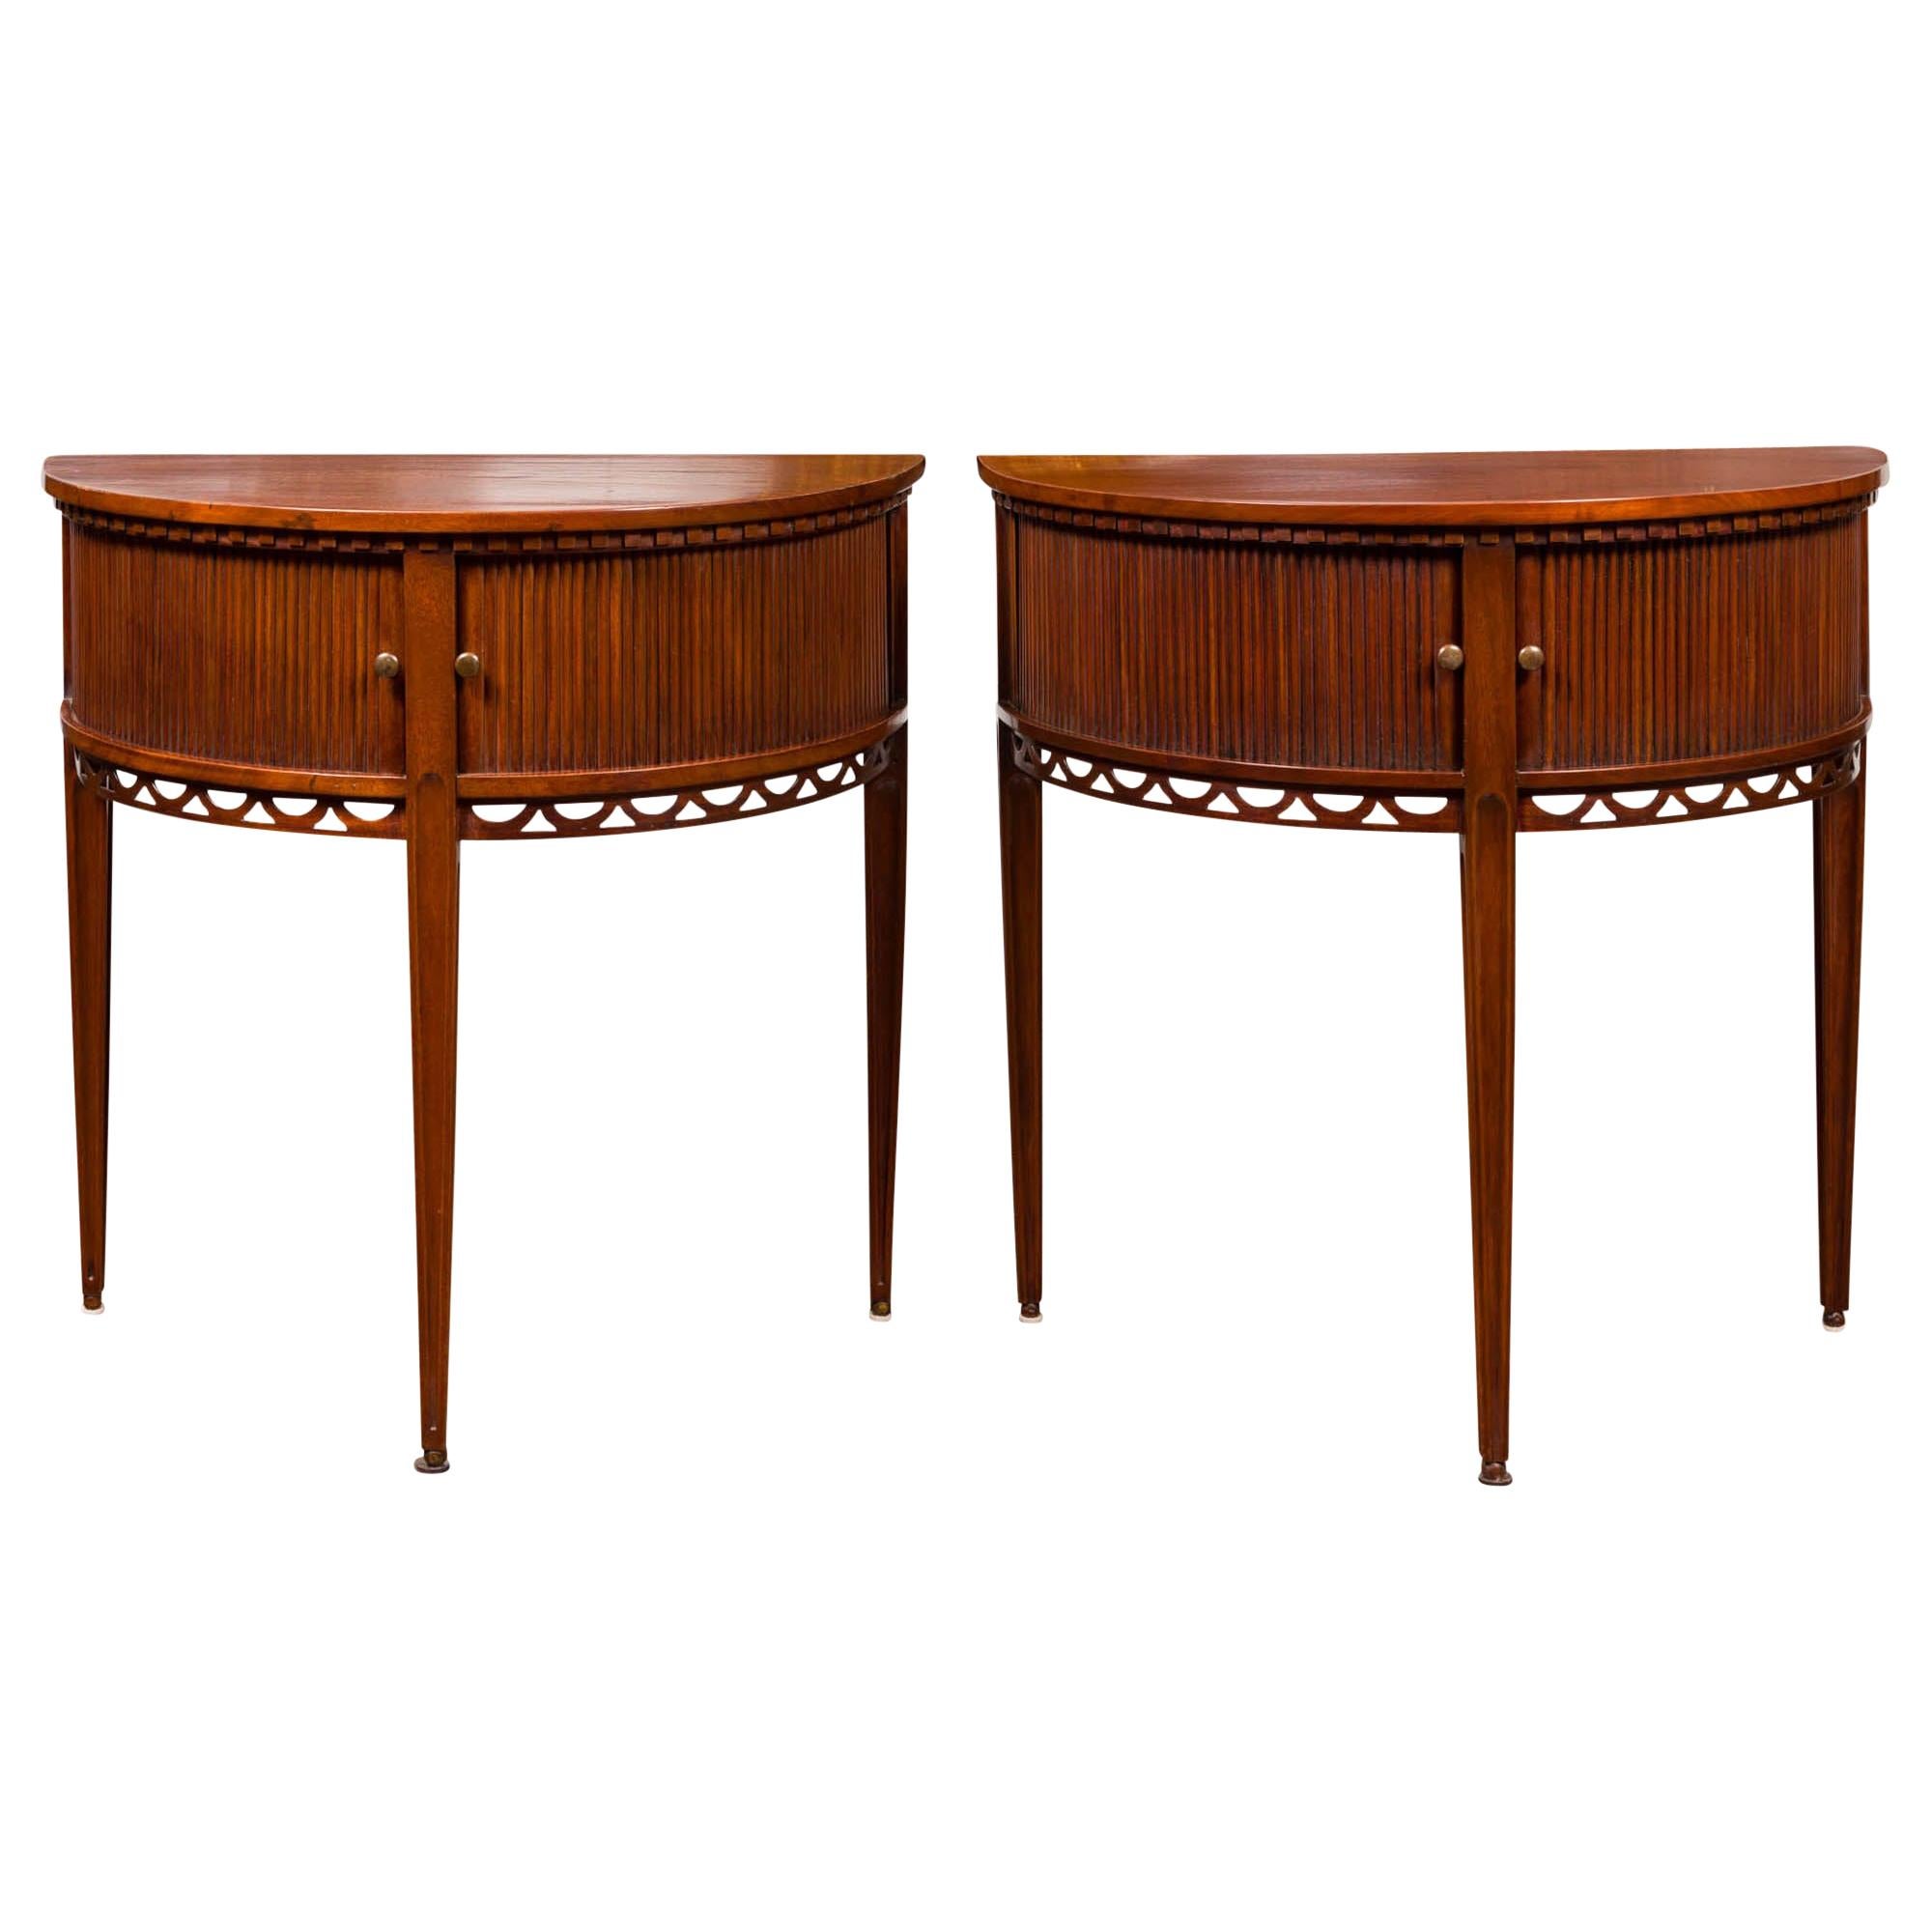 Pair of English 1870s Mahogany Demilune Tables with Reeded Sliding Doors